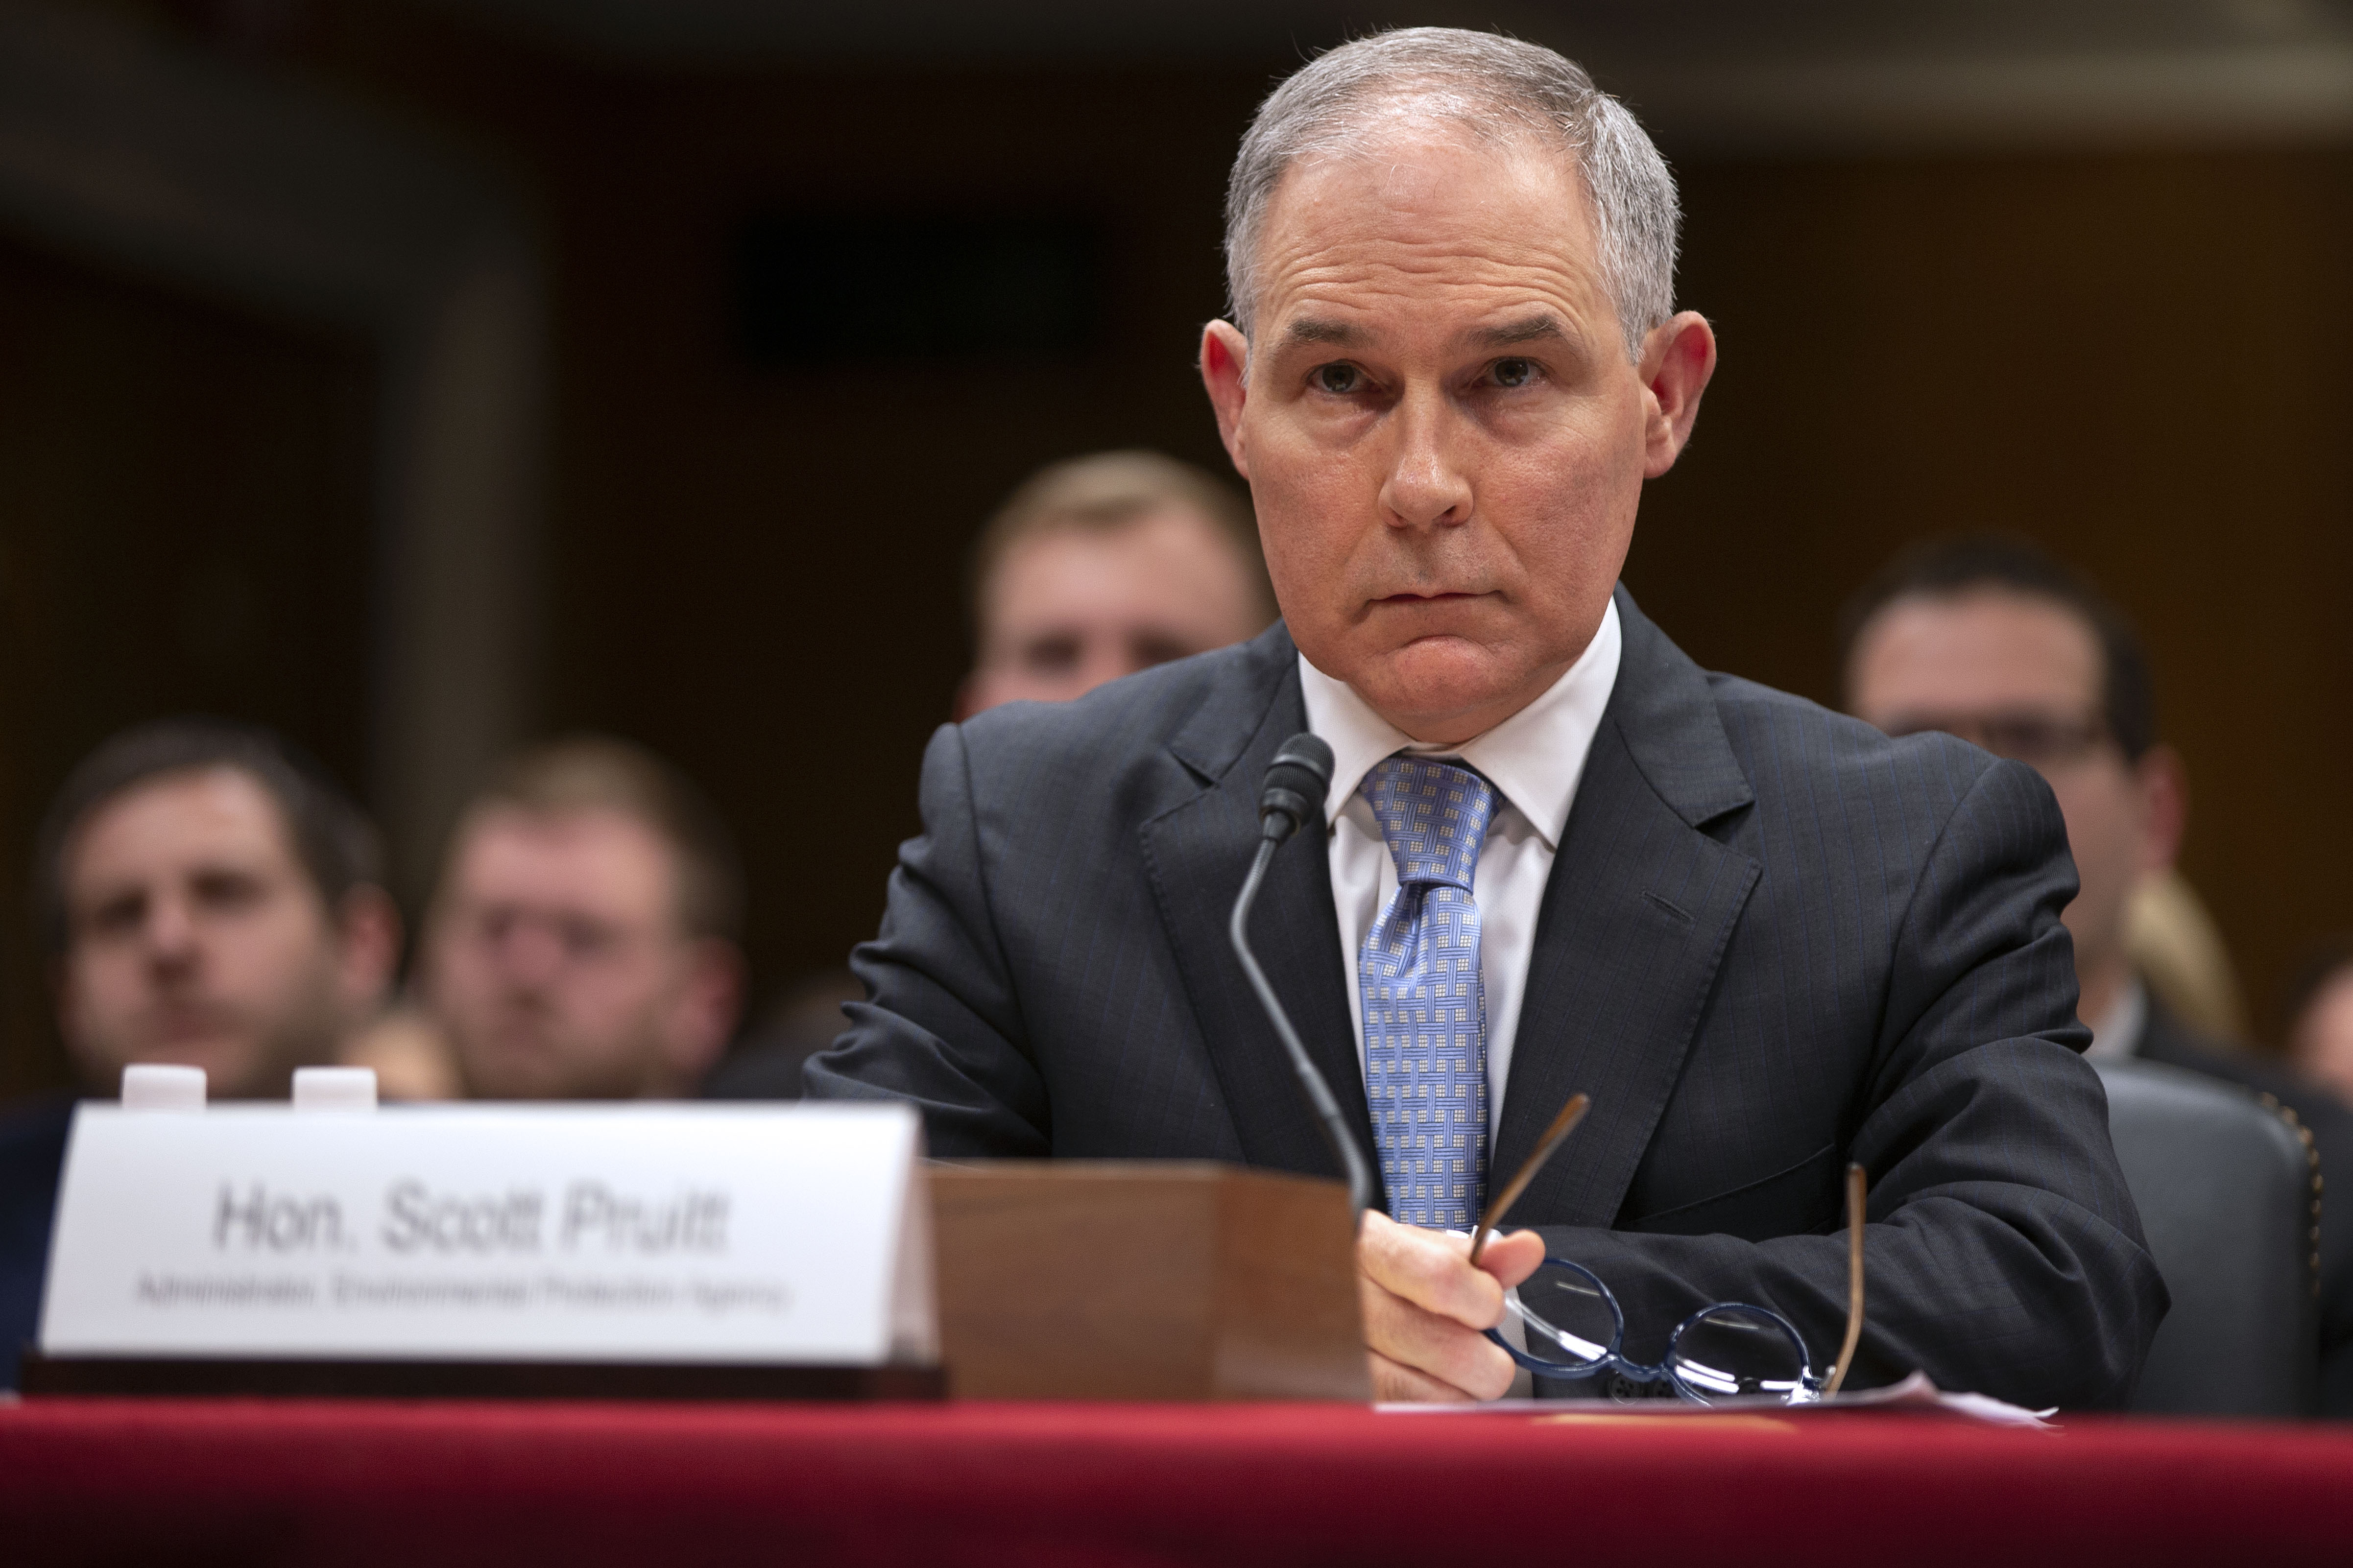 EPA Administrator Pruitt testifies before a Senate Appropriations Subcommittee hearing on the proposed budget for the Environmental Protection Agency on Capitol Hill in Washington